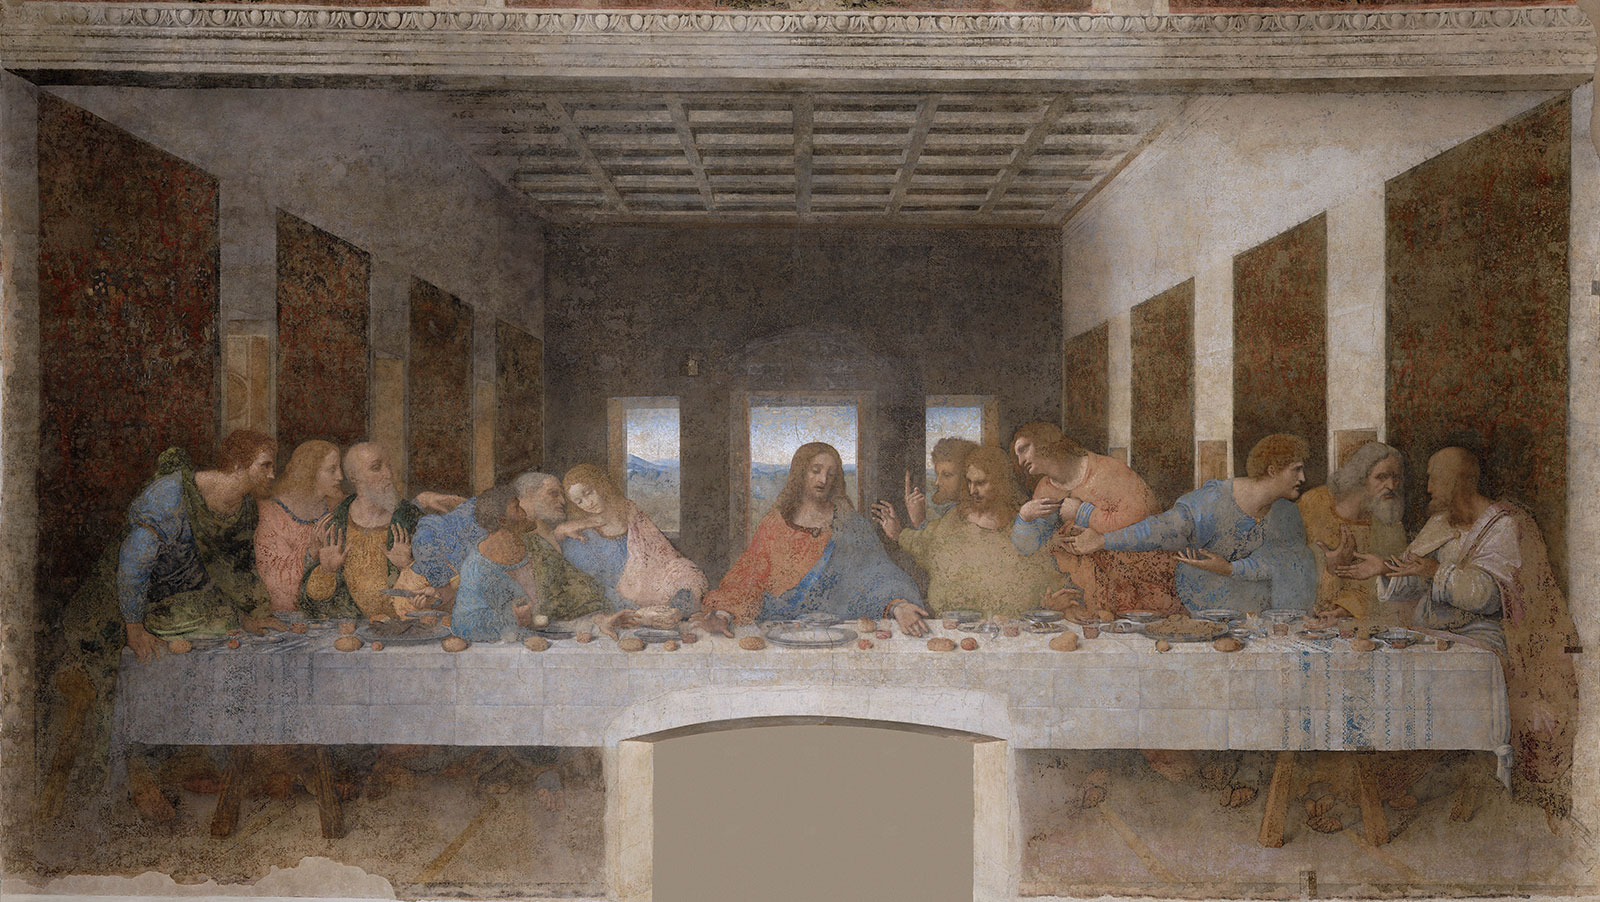 7 in 10 People Can’t Get Over 15/20 on This All-Rounded Trivia Challenge — Can You Impress Me? The Last Supper Painting By Leonardo Da Vinci